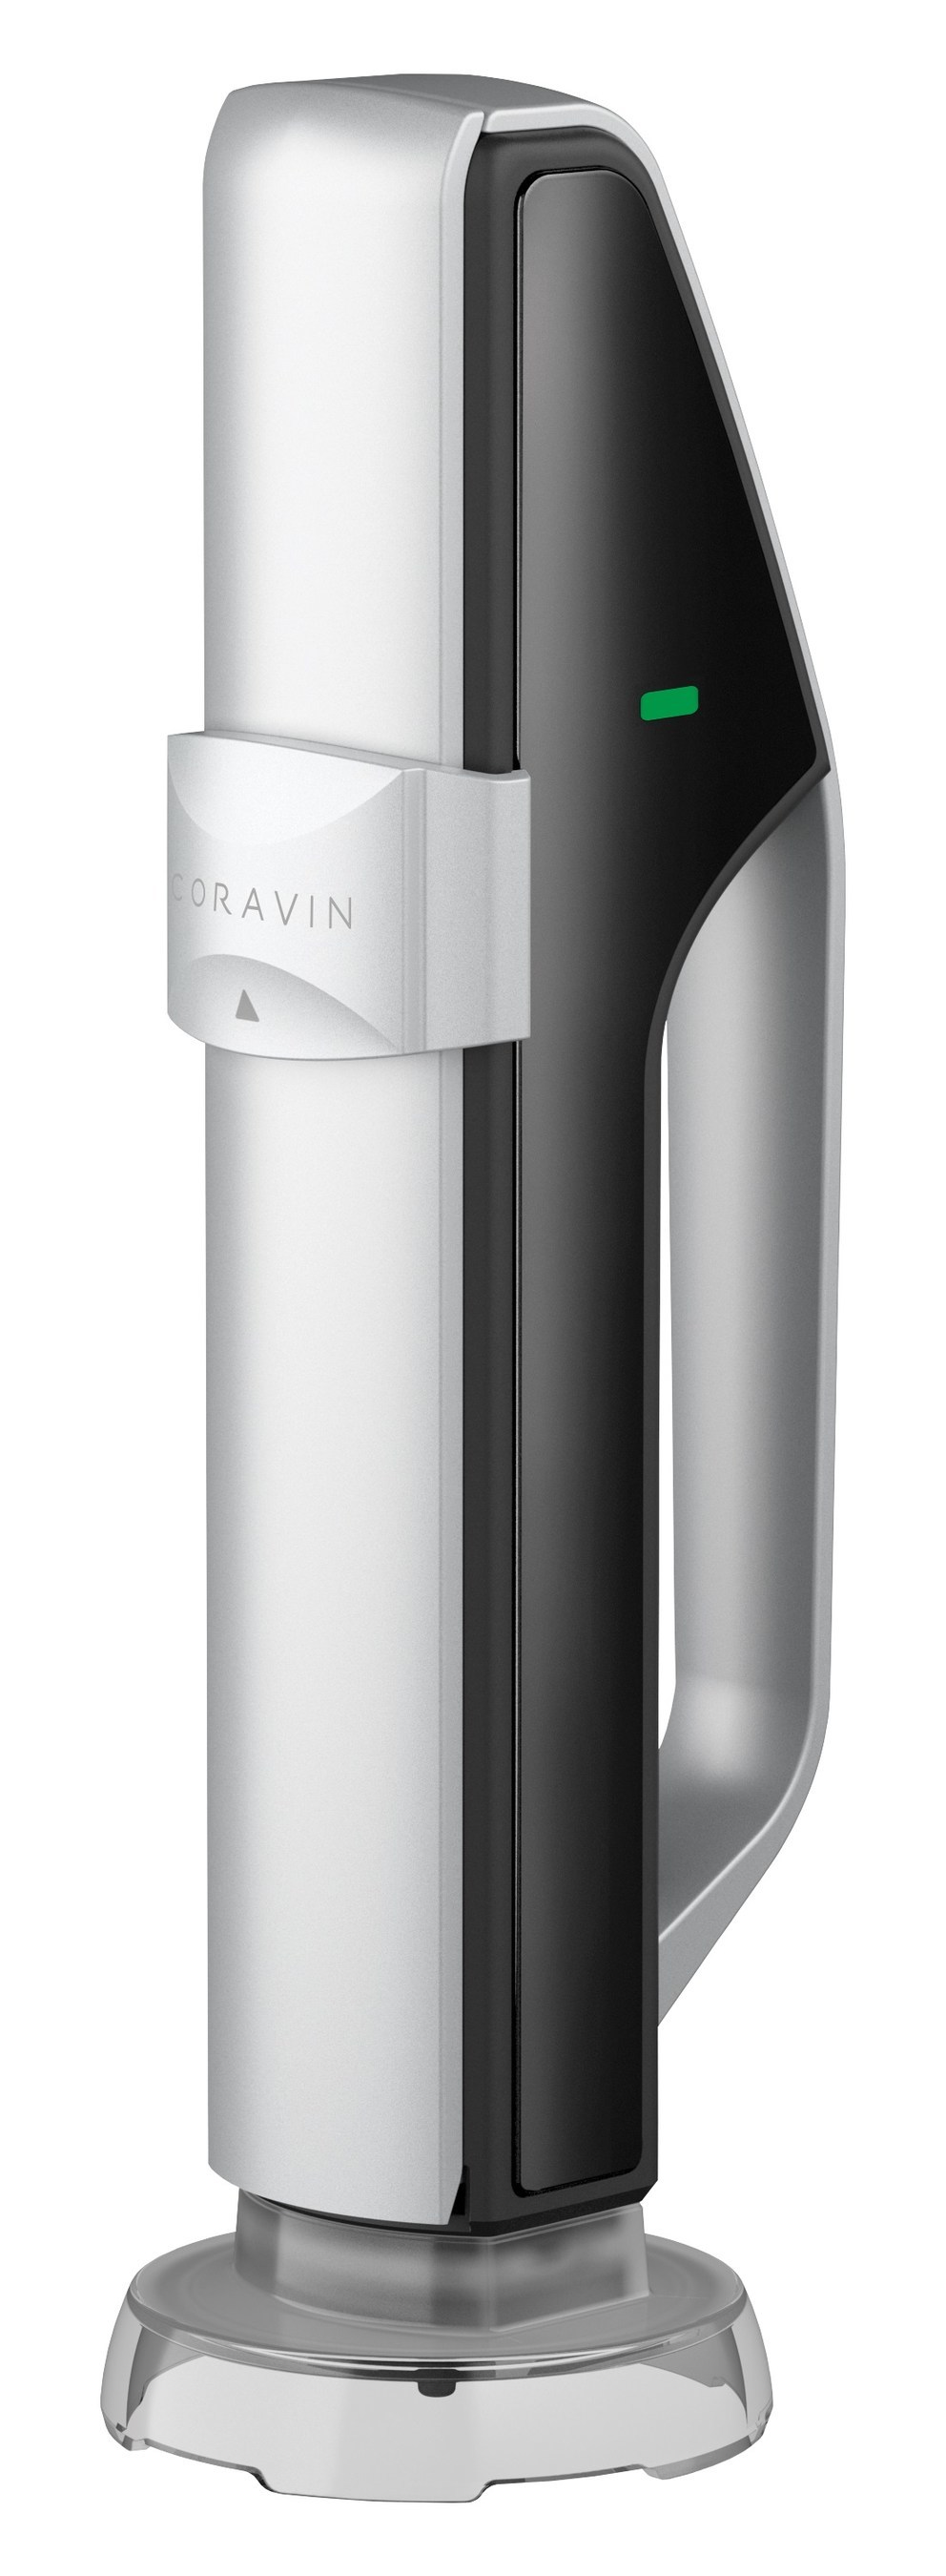 Coravin Announces a New Innovation for Champagne and Sparkling